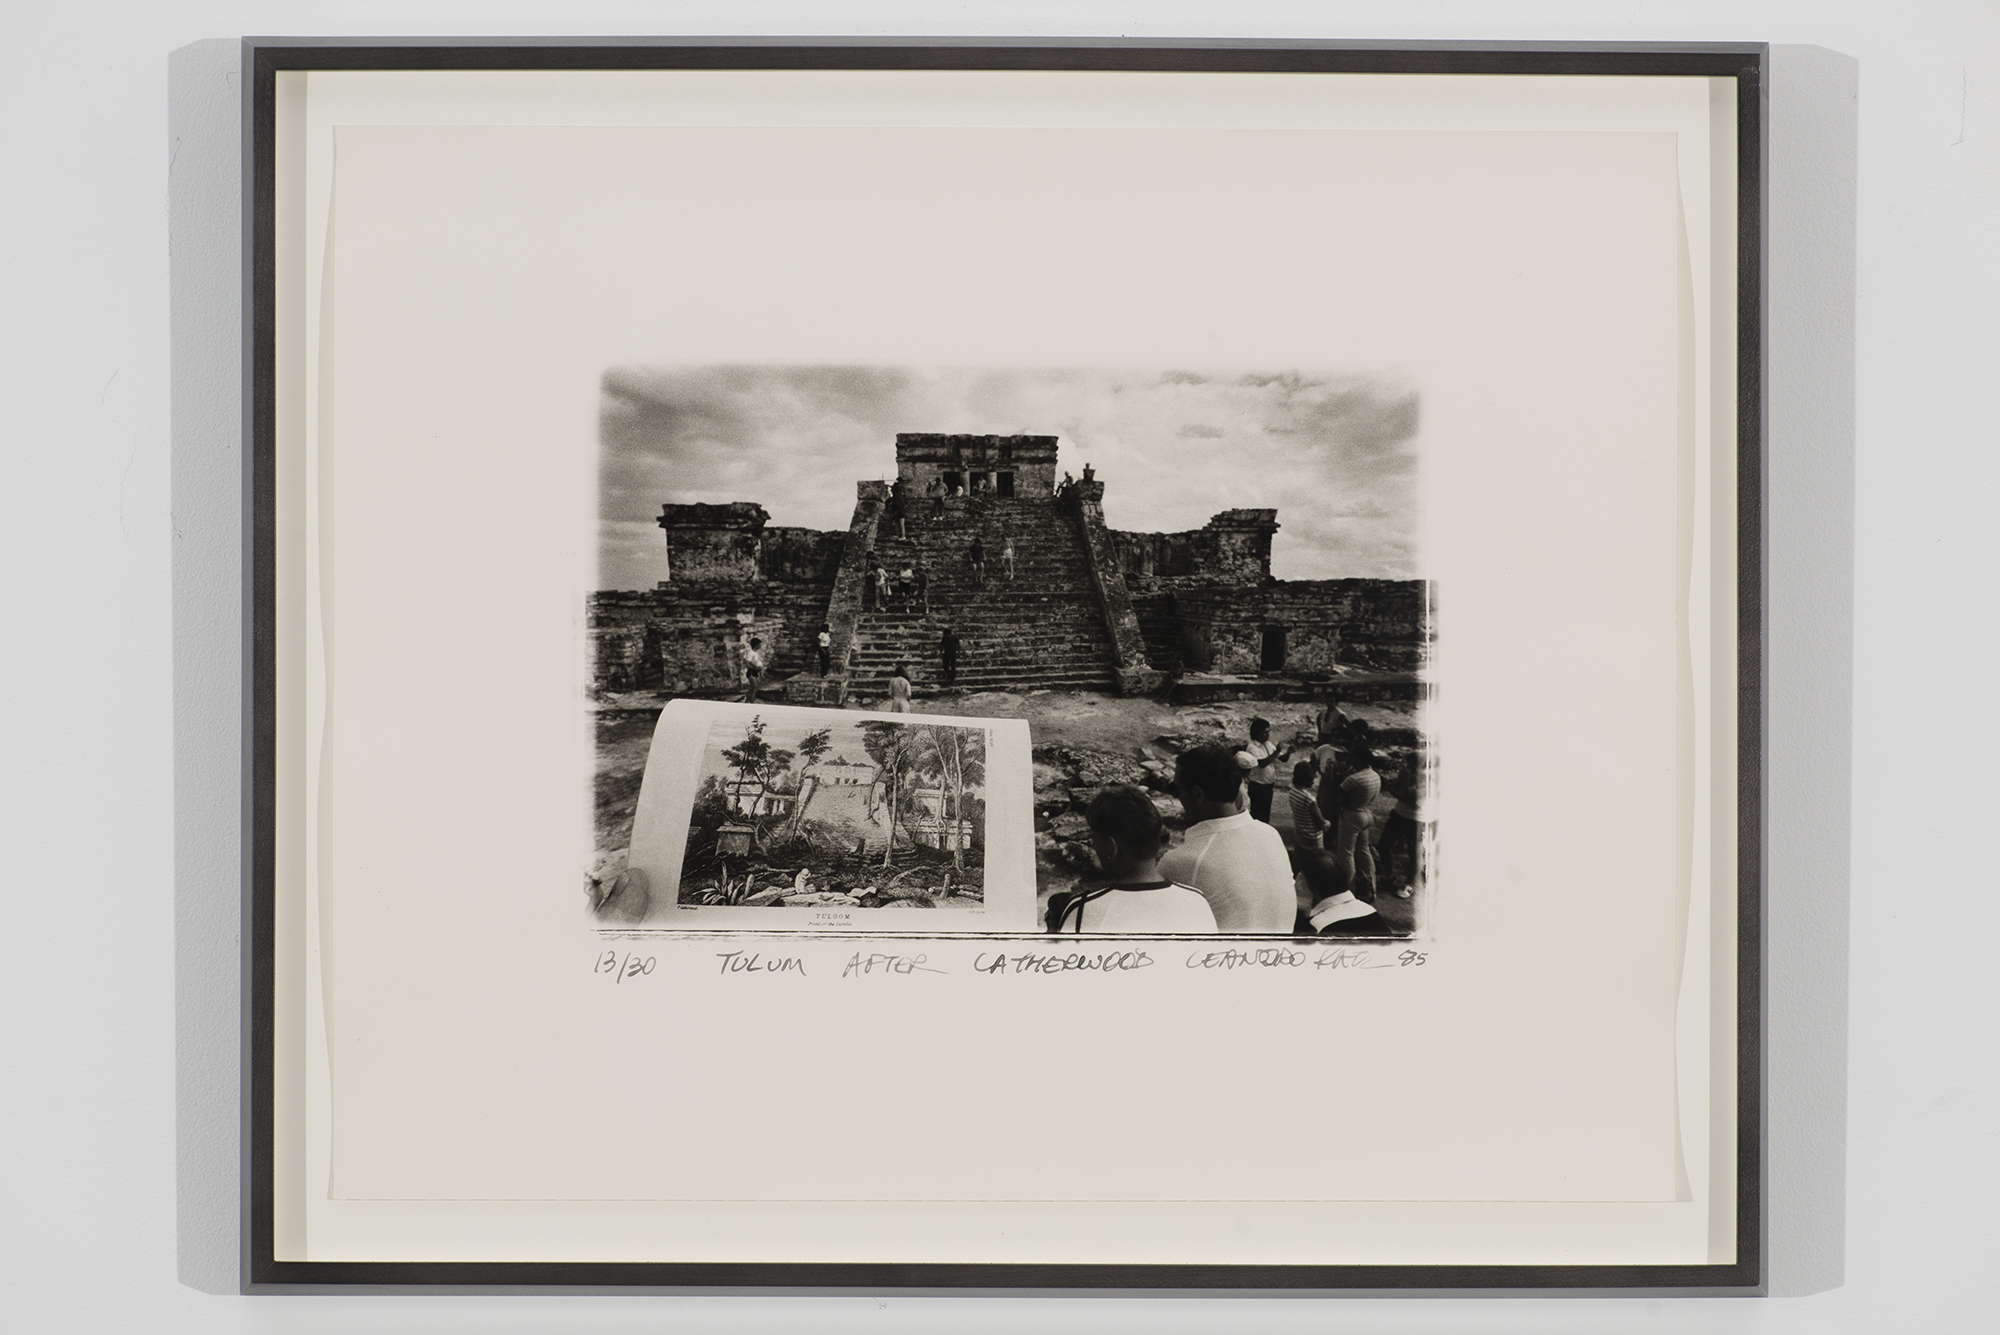  Leandro Katz,    El Castillo [Chichén Itzá],  1985. Gelatin silver print, 20 x 16 inches. The Museum of Modern Art. Promised gift of Patricia Phelps de Cisneros through the Latin American and Caribbean Fund in honor of May Castleberry. 